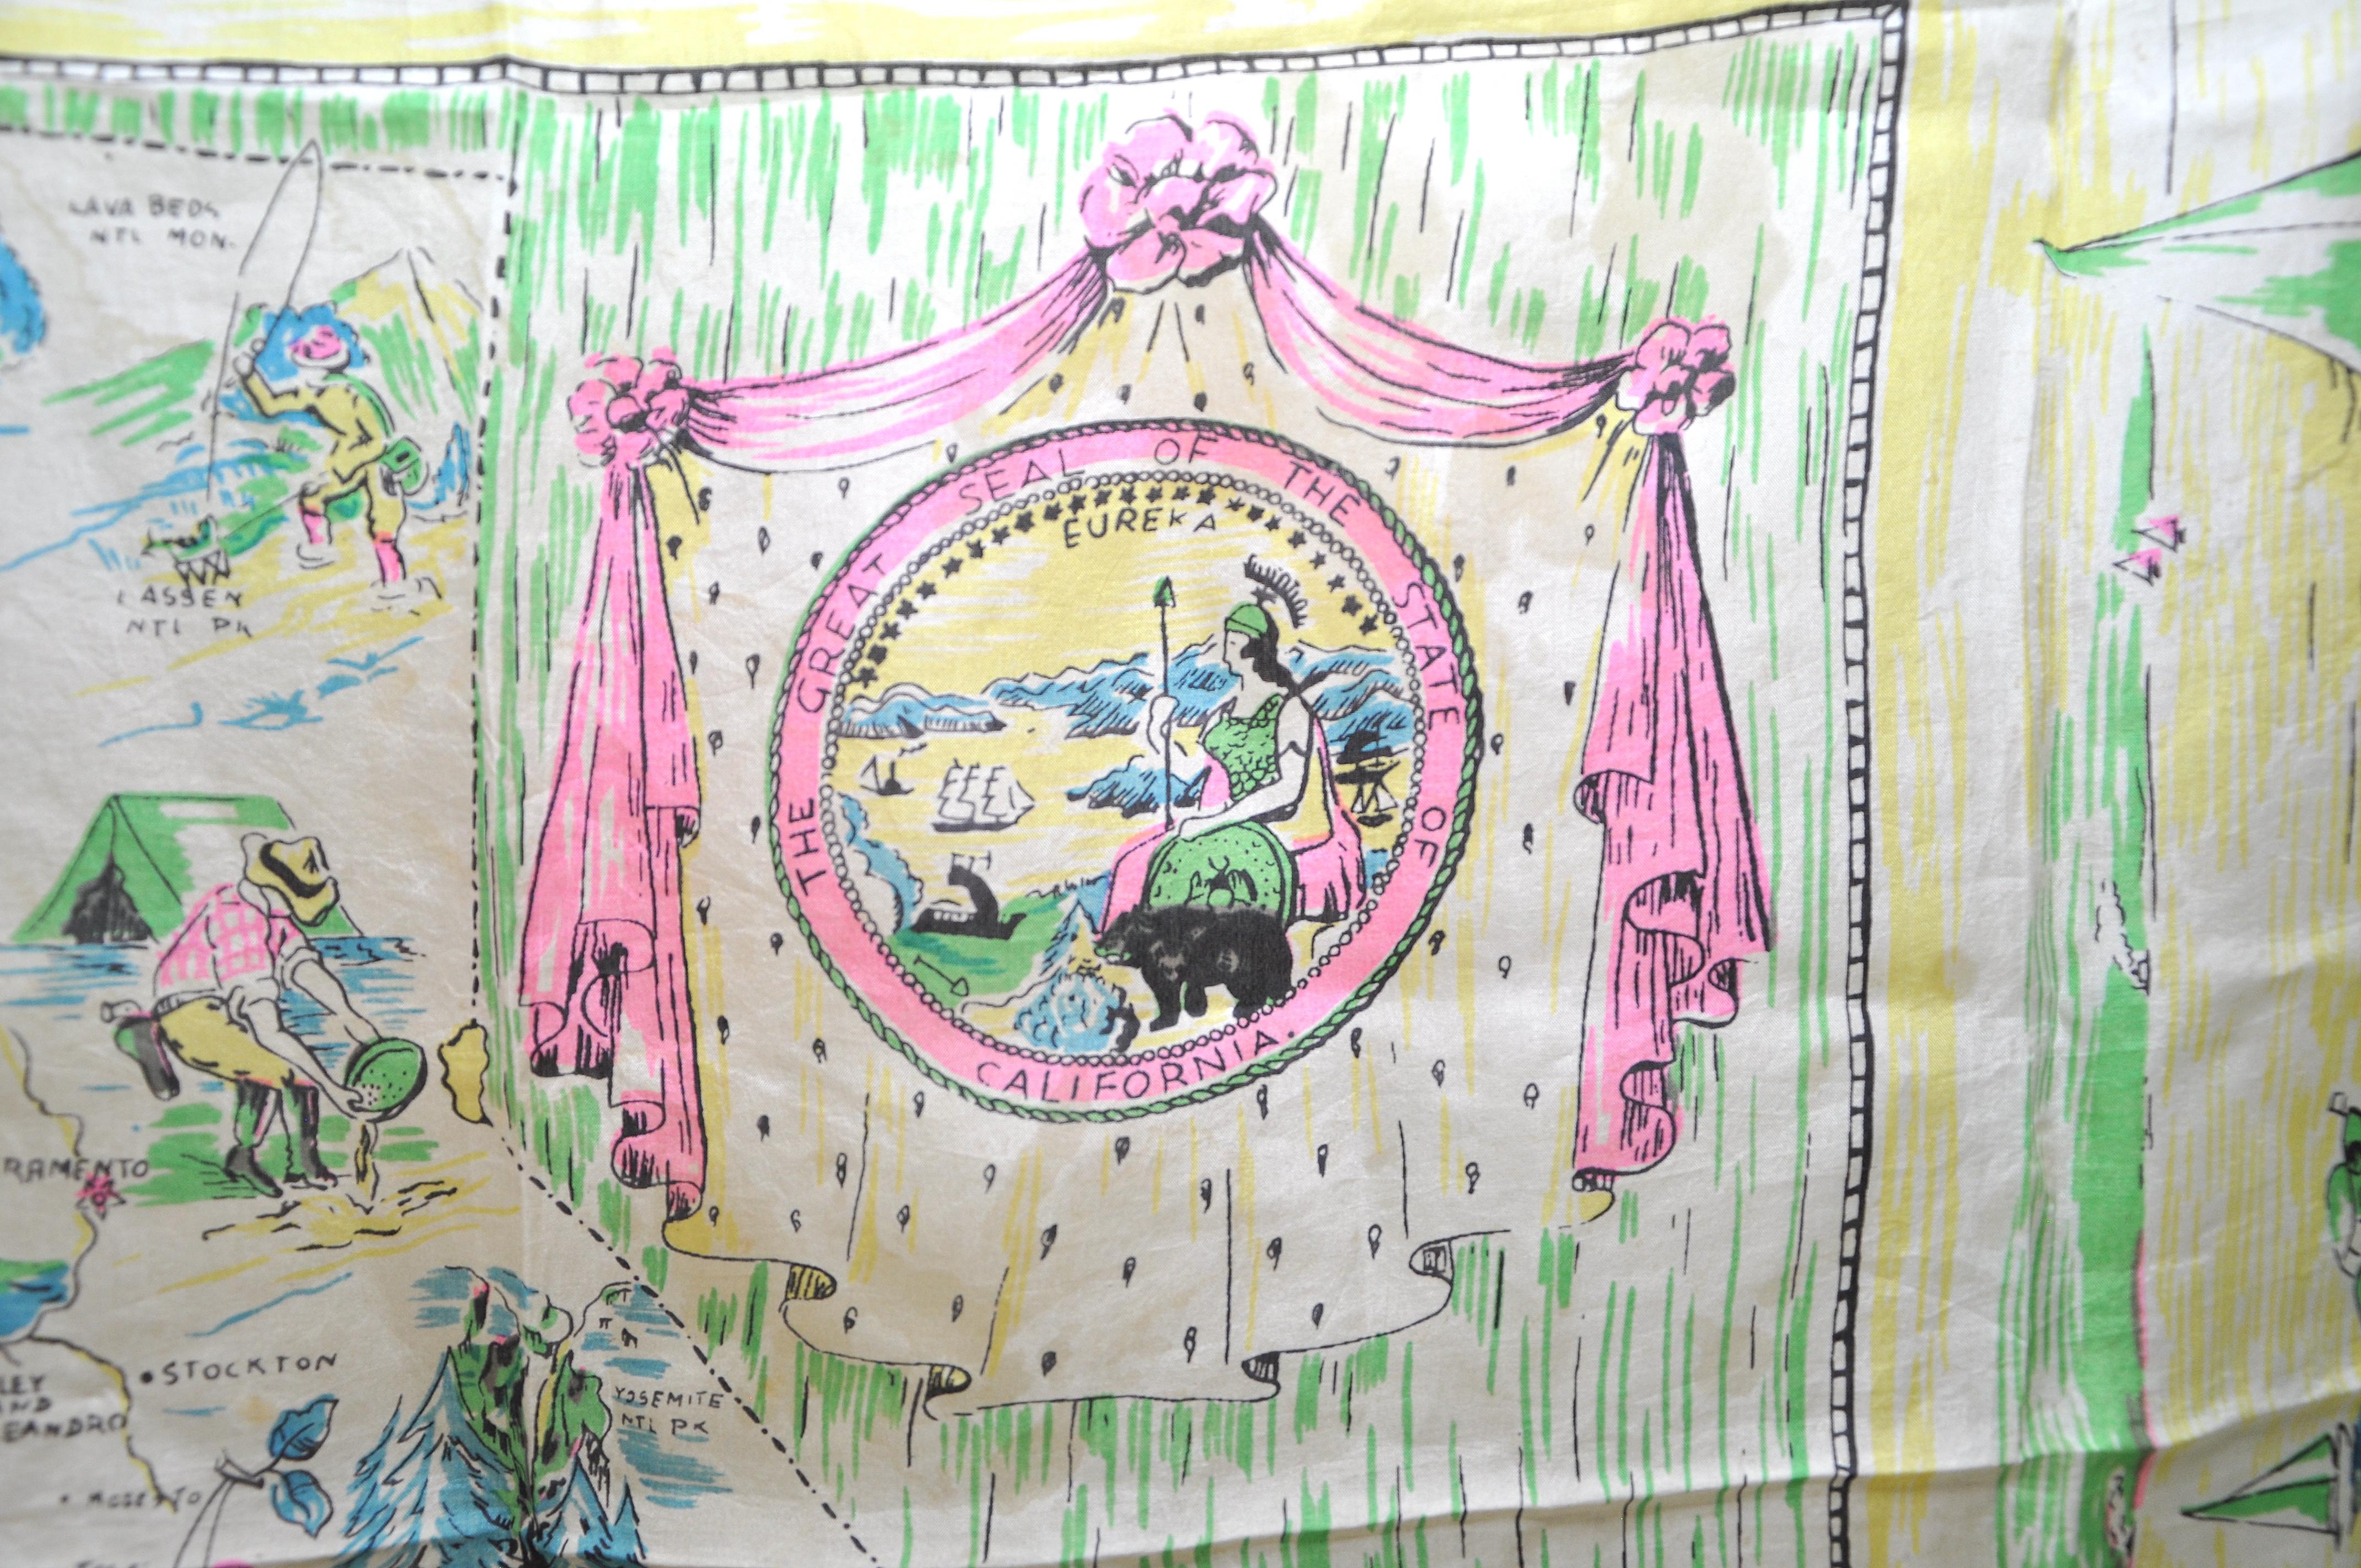 Large vintage green pink yellow blue silk scarf California America themes

Beautiful and rare vintage silk scarf 

Very pretty, multicolored, joyous, fun, documenting a period in time, historical, sentimental

Very striking and eye-catching